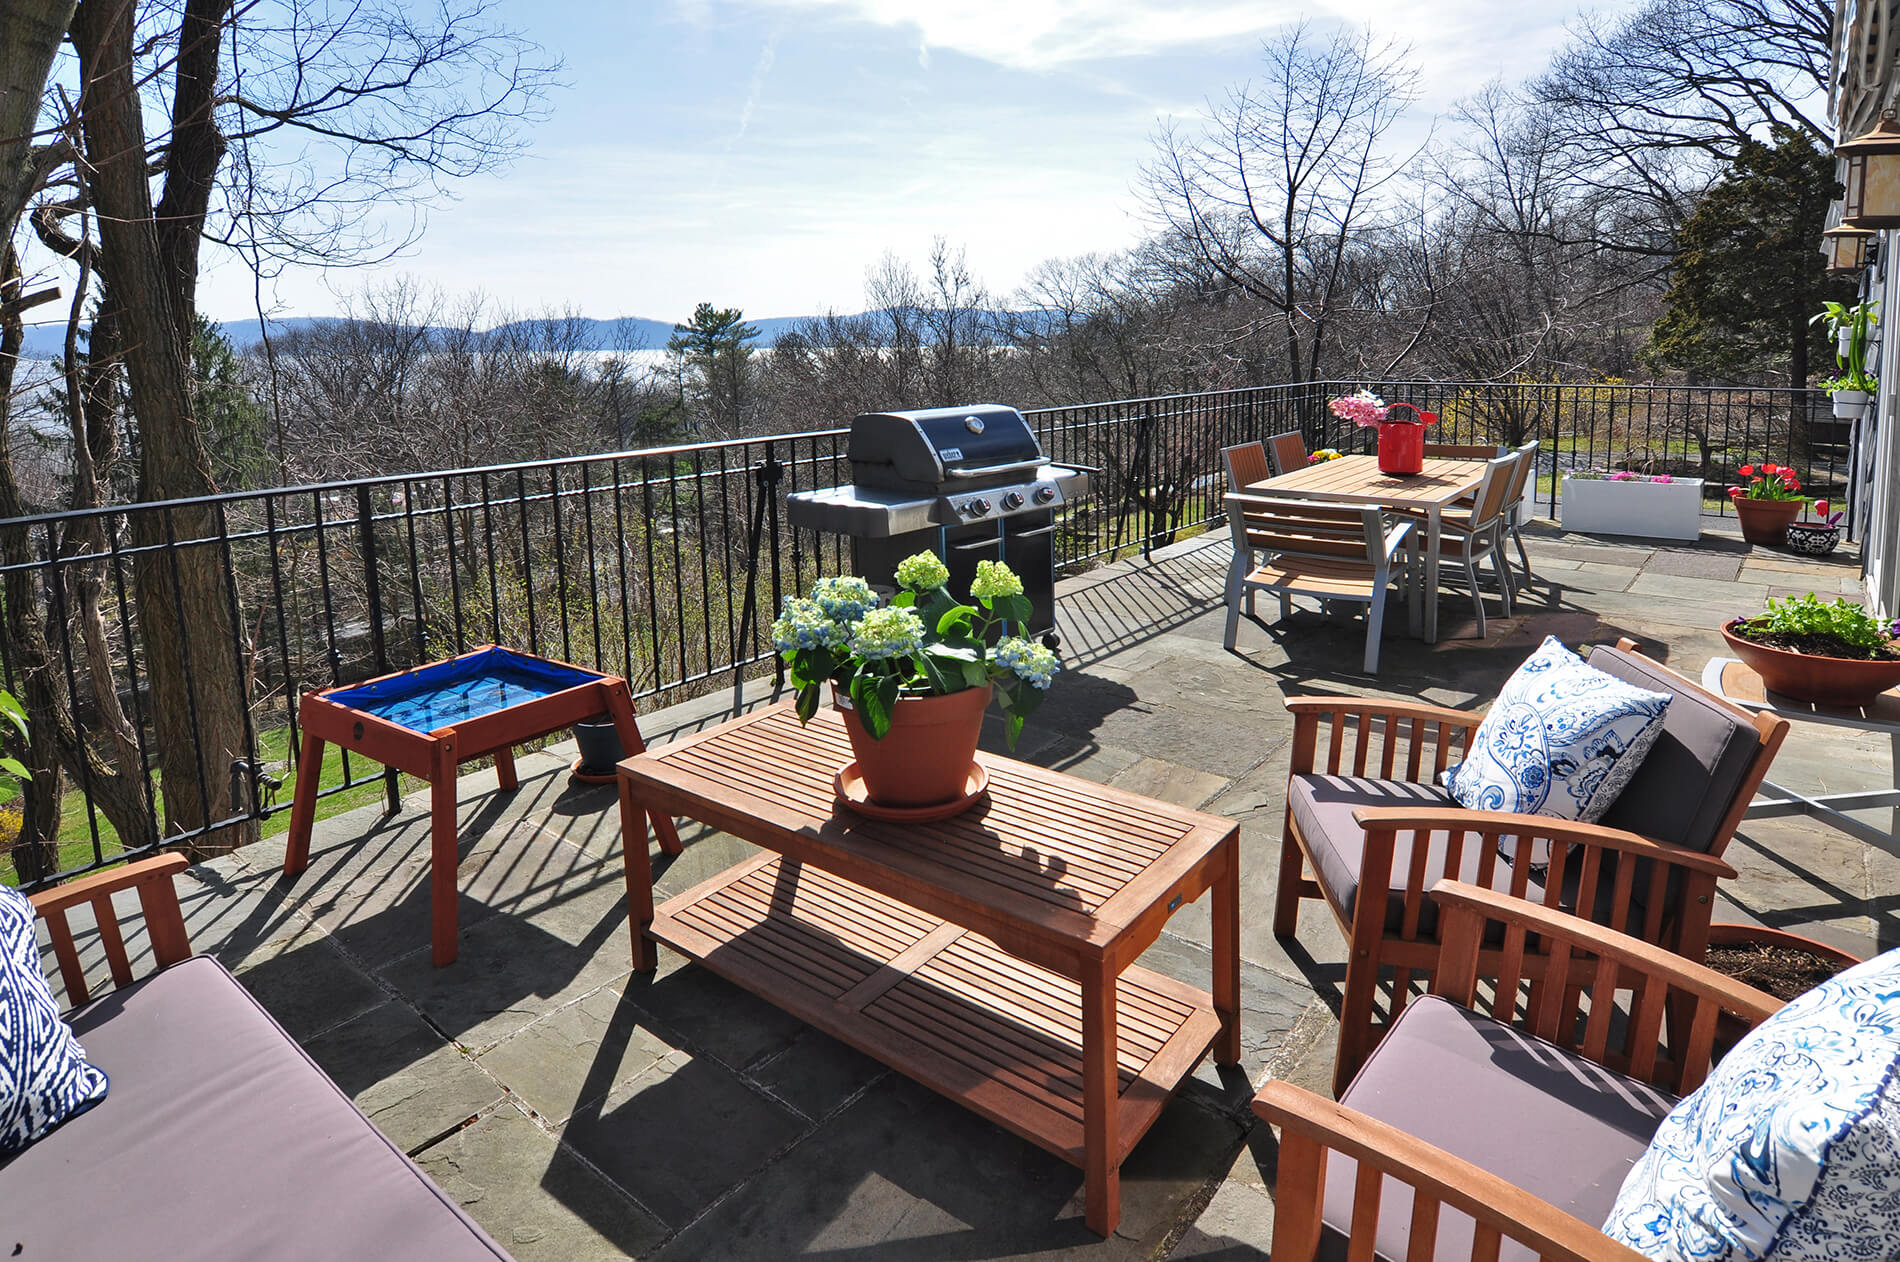 upstate new york houses for sale hudson westchester dobbs ferry